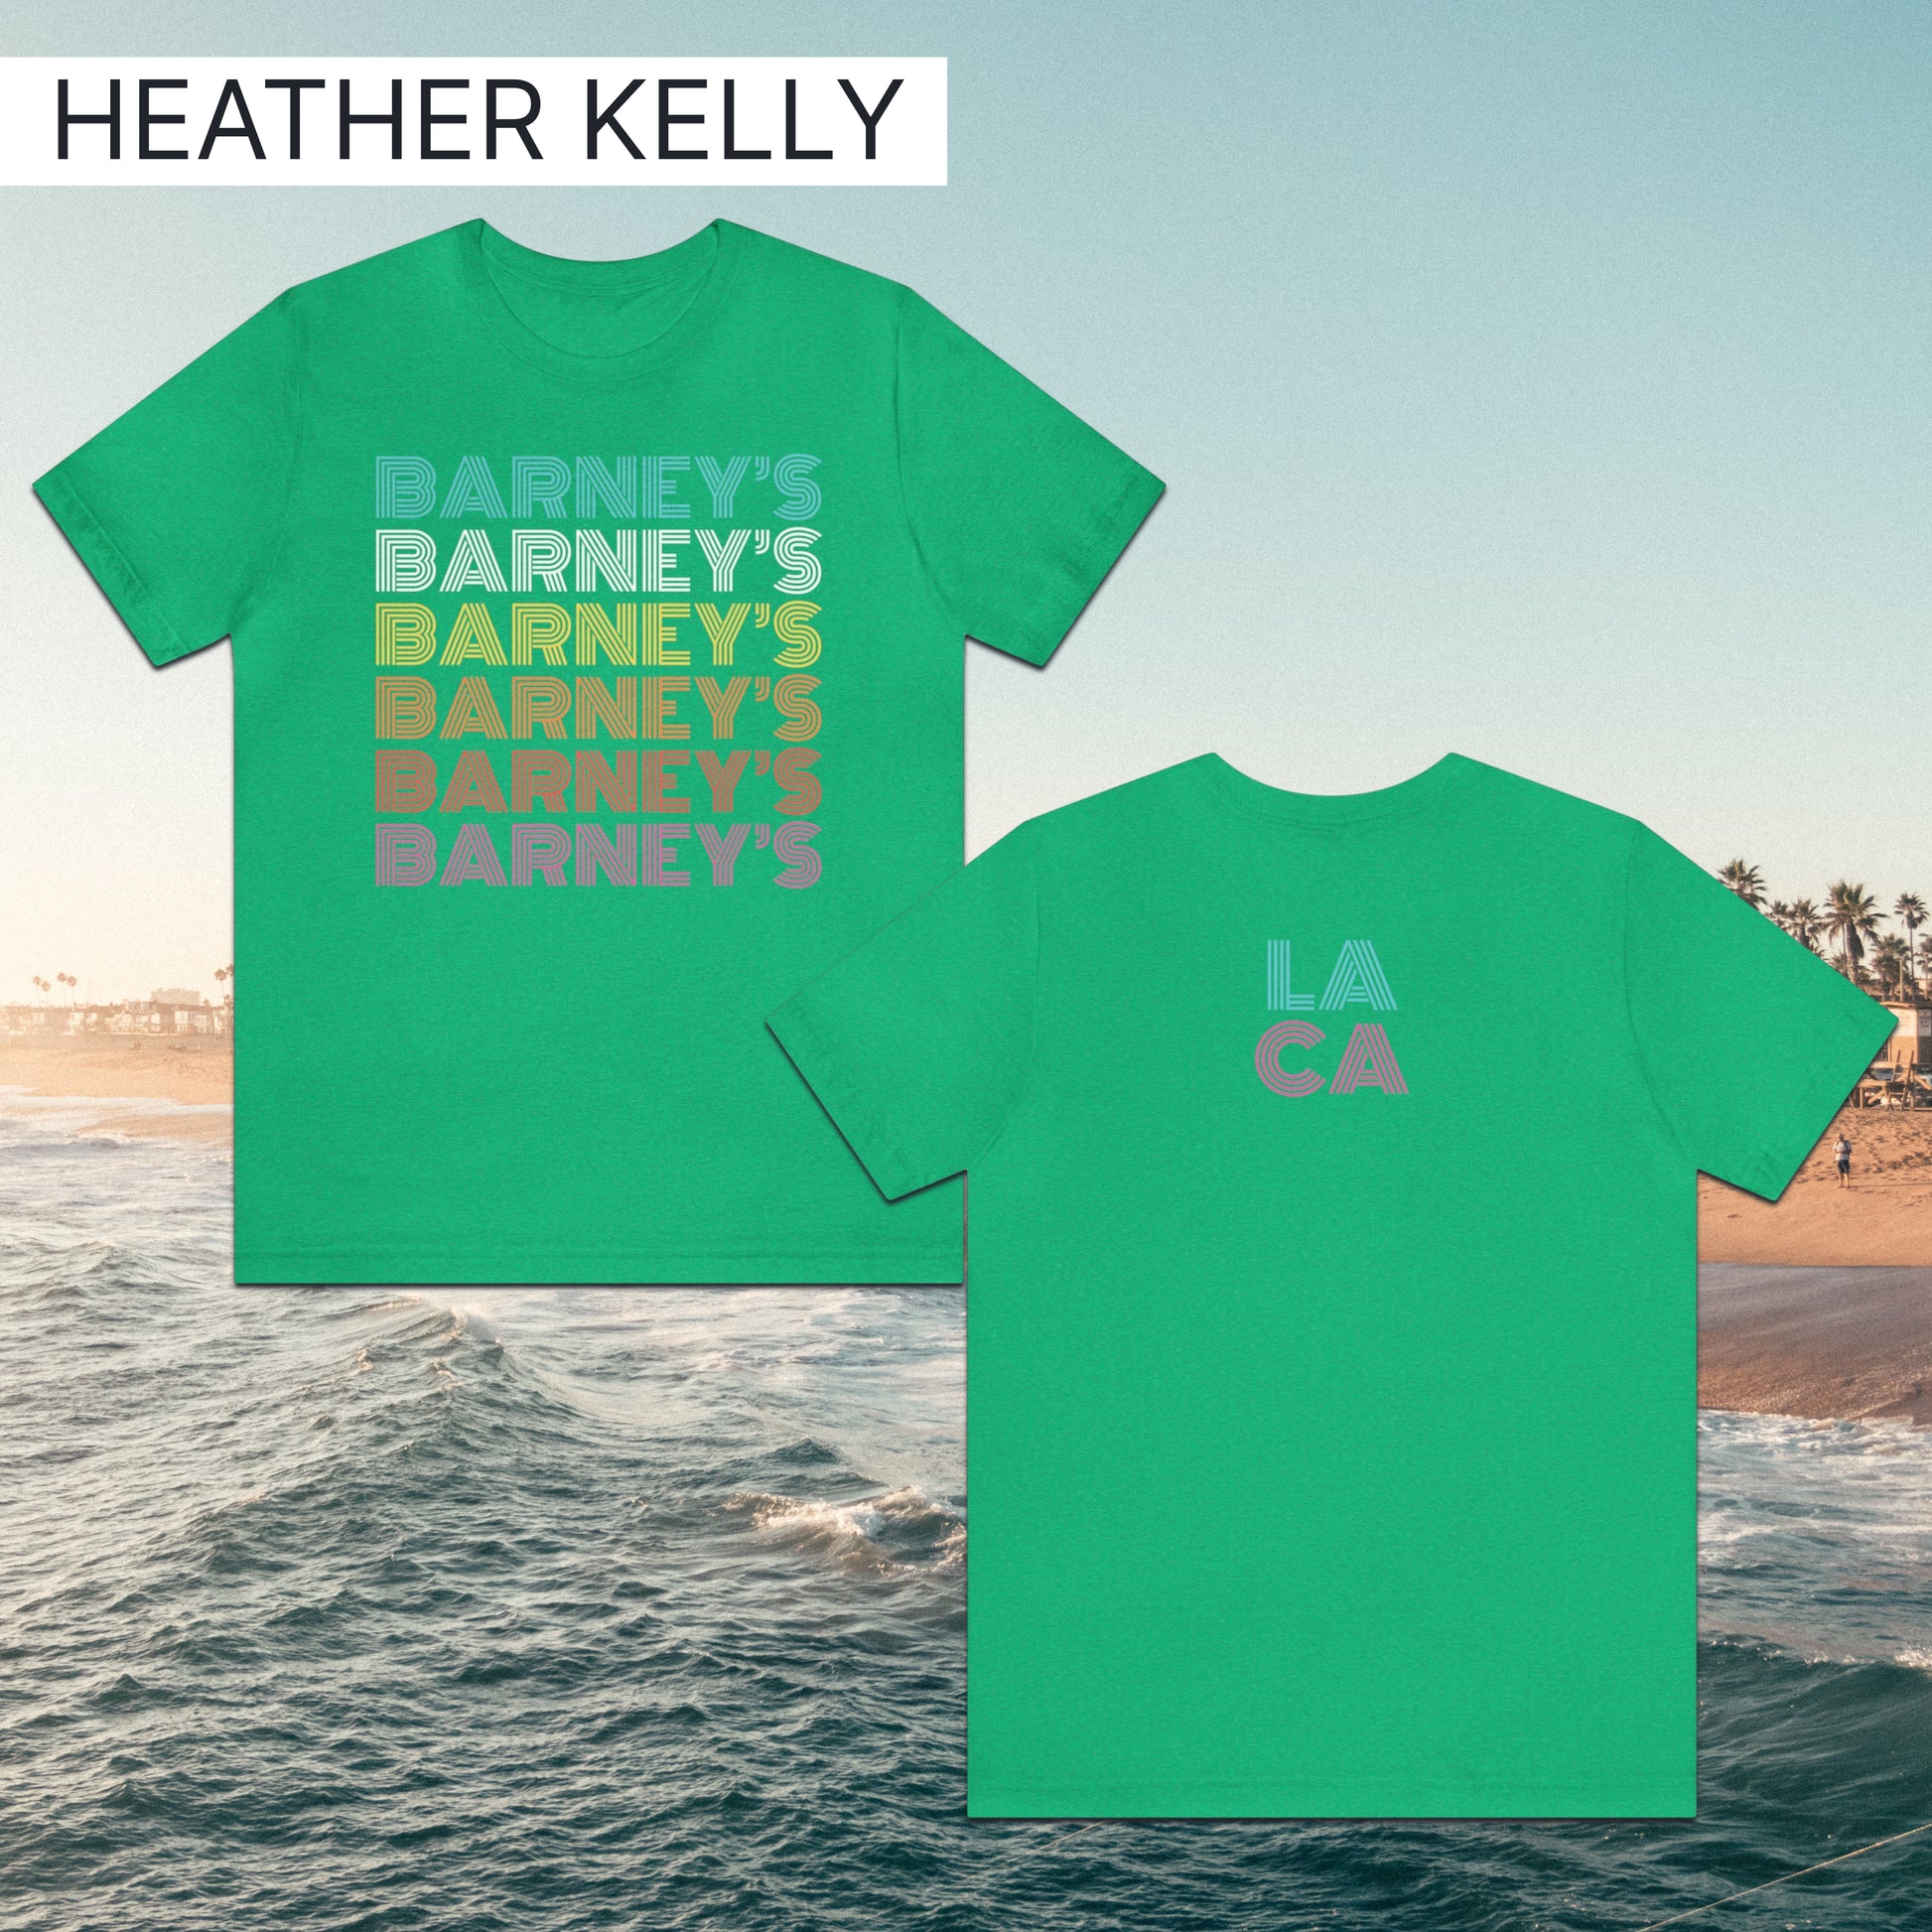 Barney's x6 Retro Hollywood | BARNEY'S BEANERY - Men's Retro Graphic Tee | Heather Kelly Bella+Canvas 3001 T-Shirt - Front And Back Flat Lay View